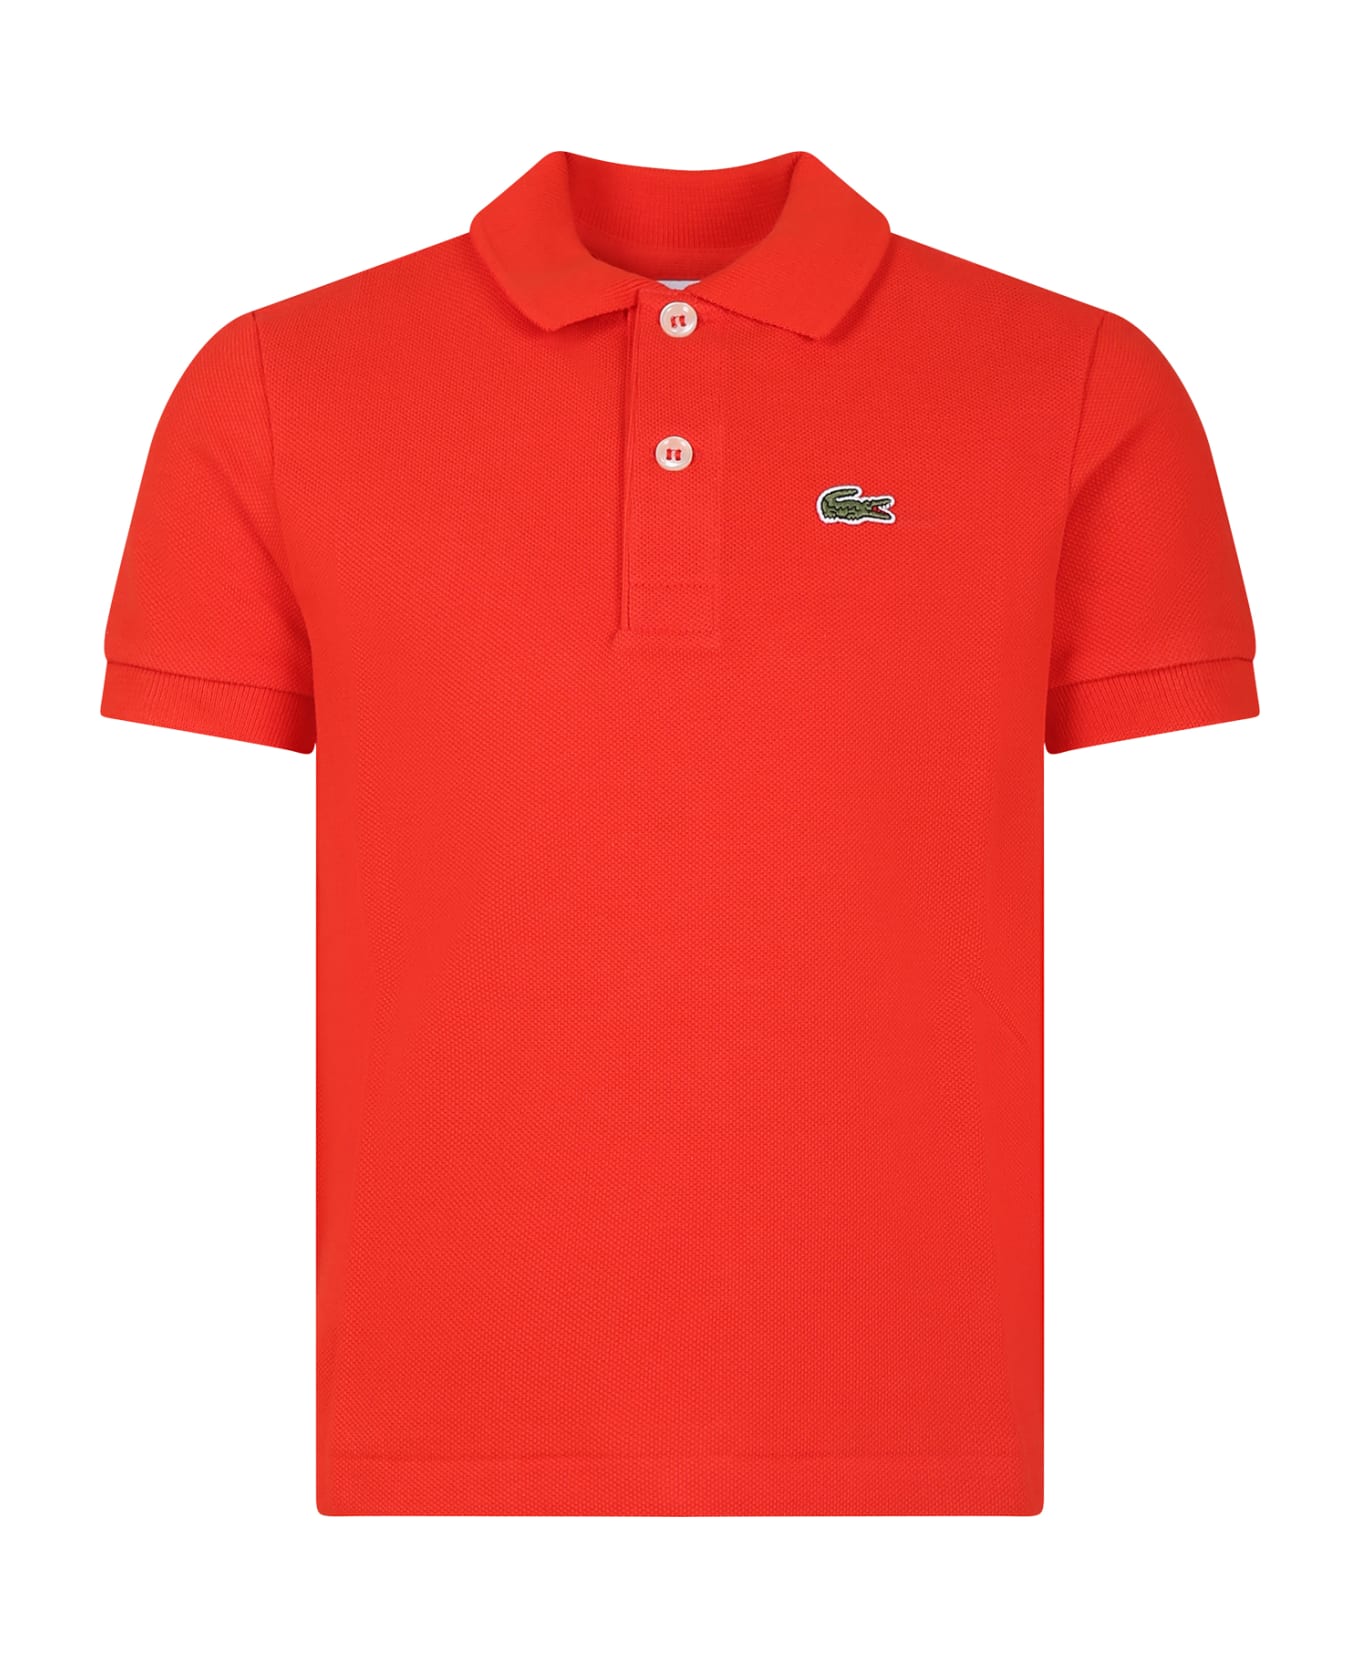 Lacoste Red Polo Shirt For Boy With Crocodile - Red